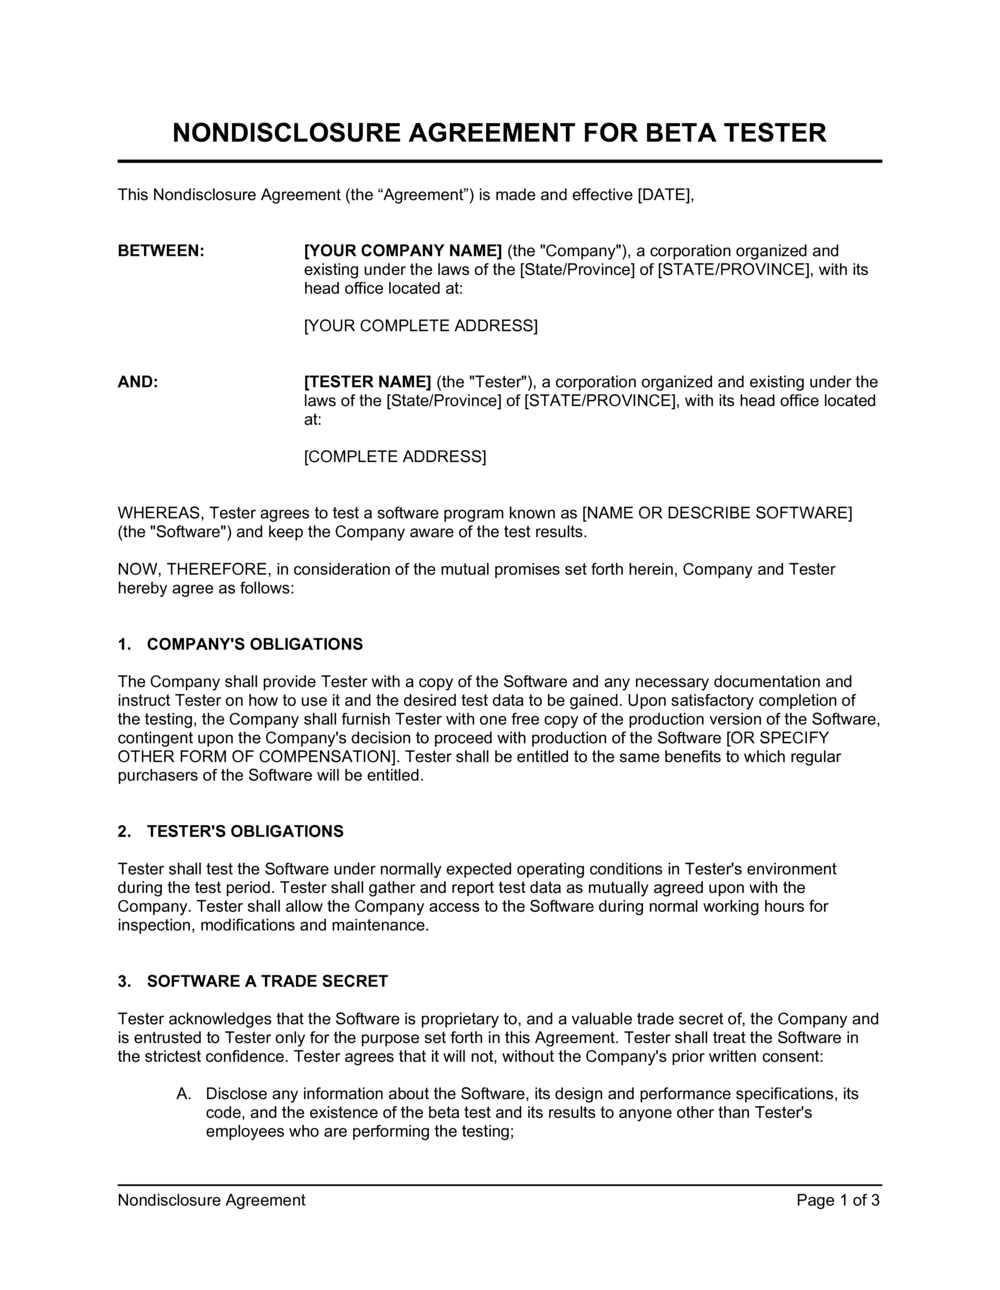 Non-Disclosure Agreement Beta Tester Template  by Business-in-a-Box™ Inside pilot test agreement template